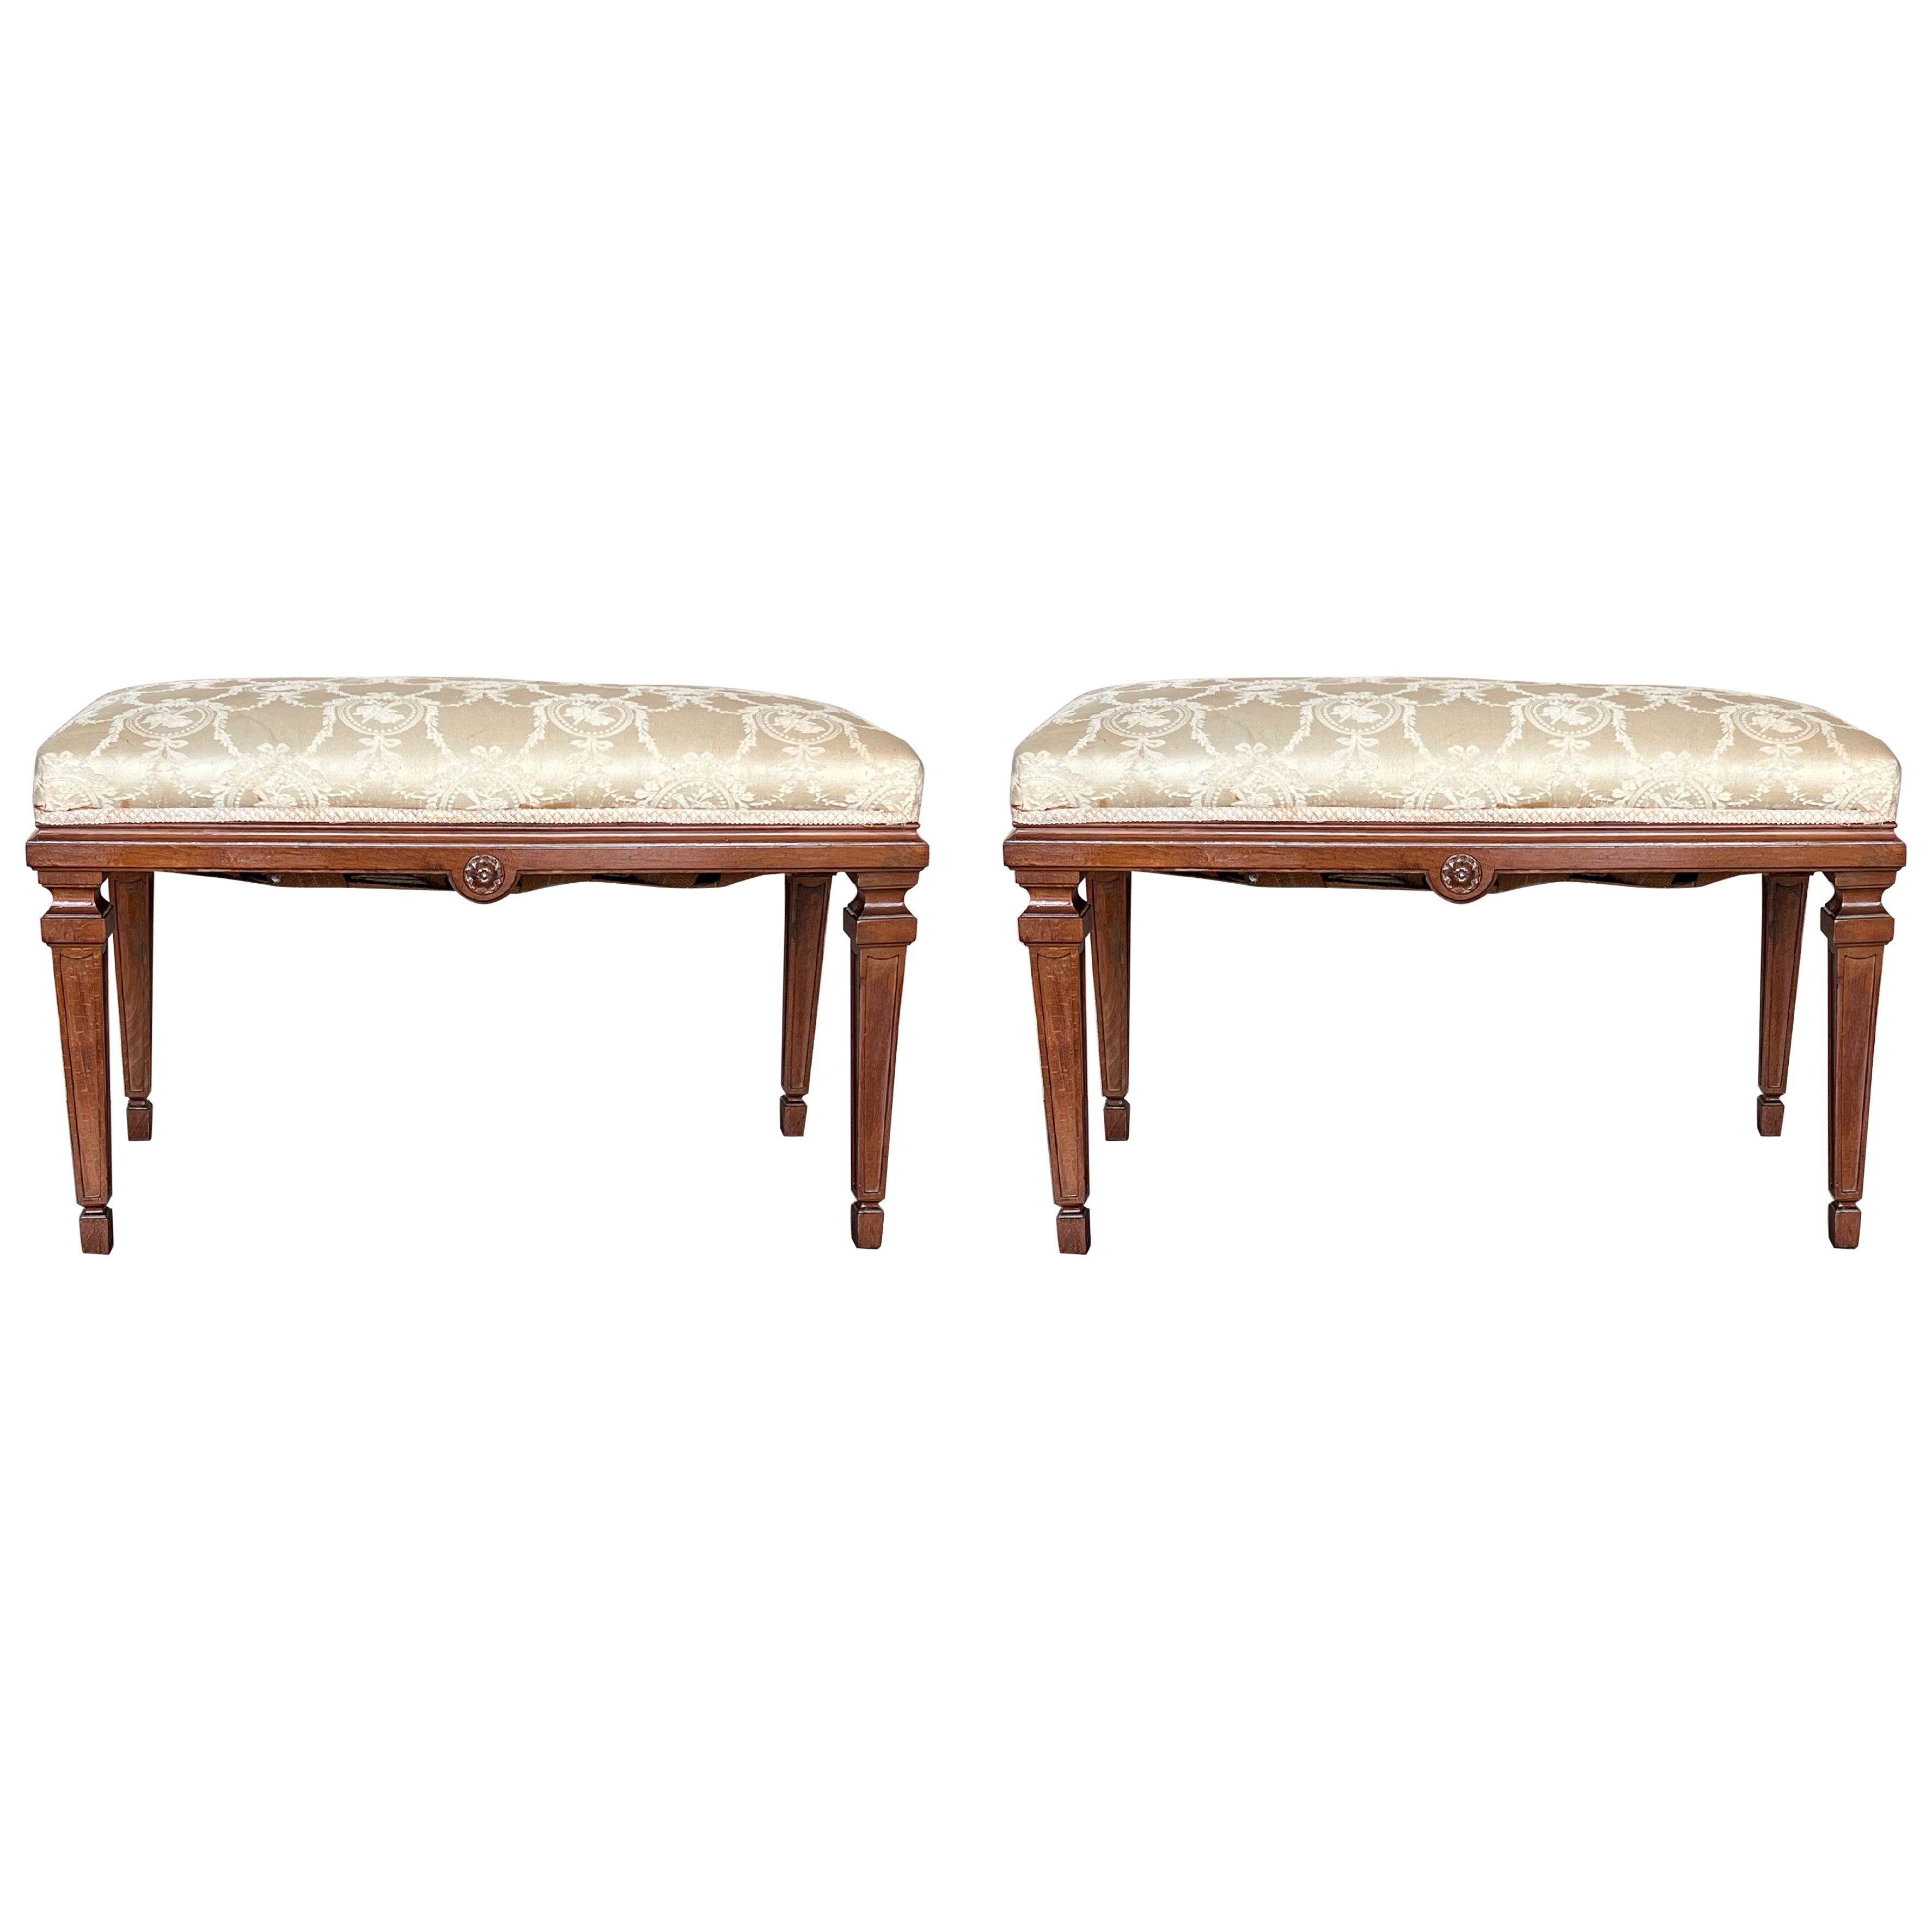 Neoclassical Style French Walnut Benches with Carved Legs, a Pair For Sale